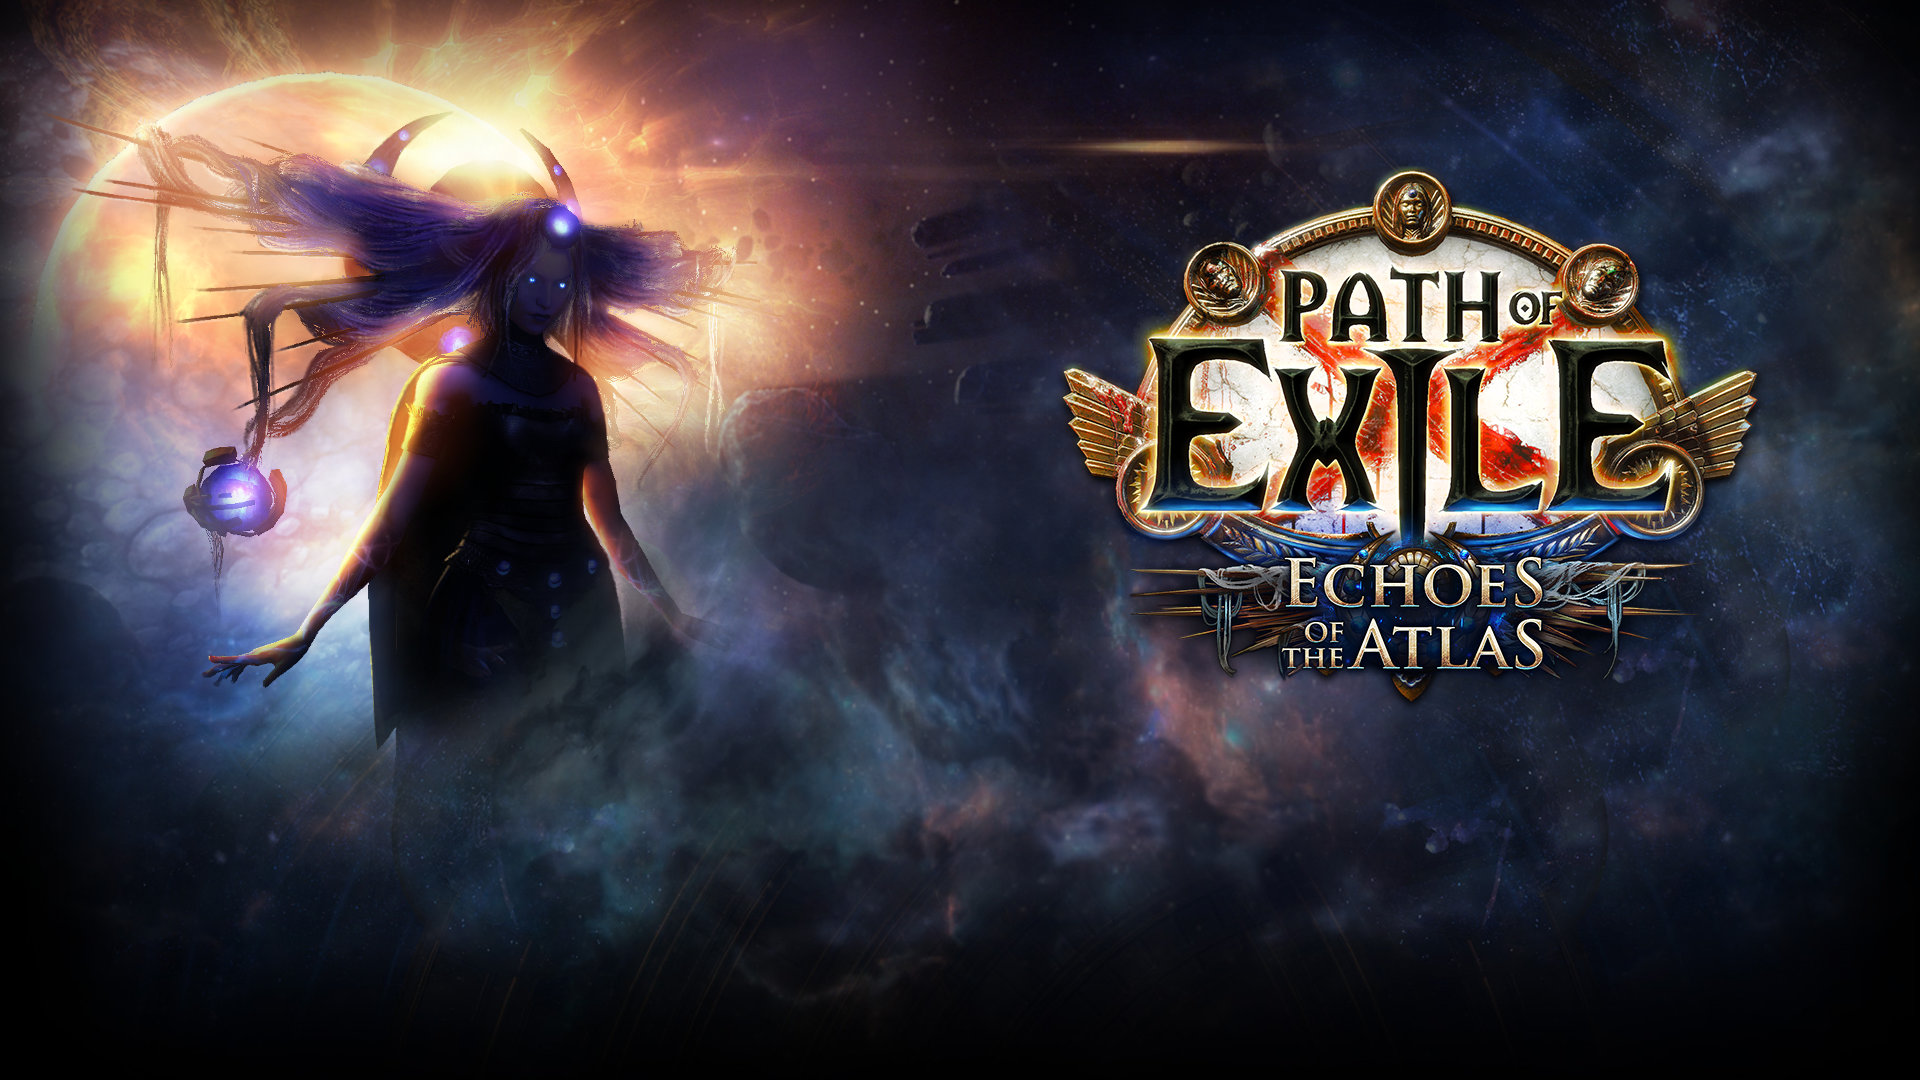 Path of Exile Echoes of the Atlas Artwork 002